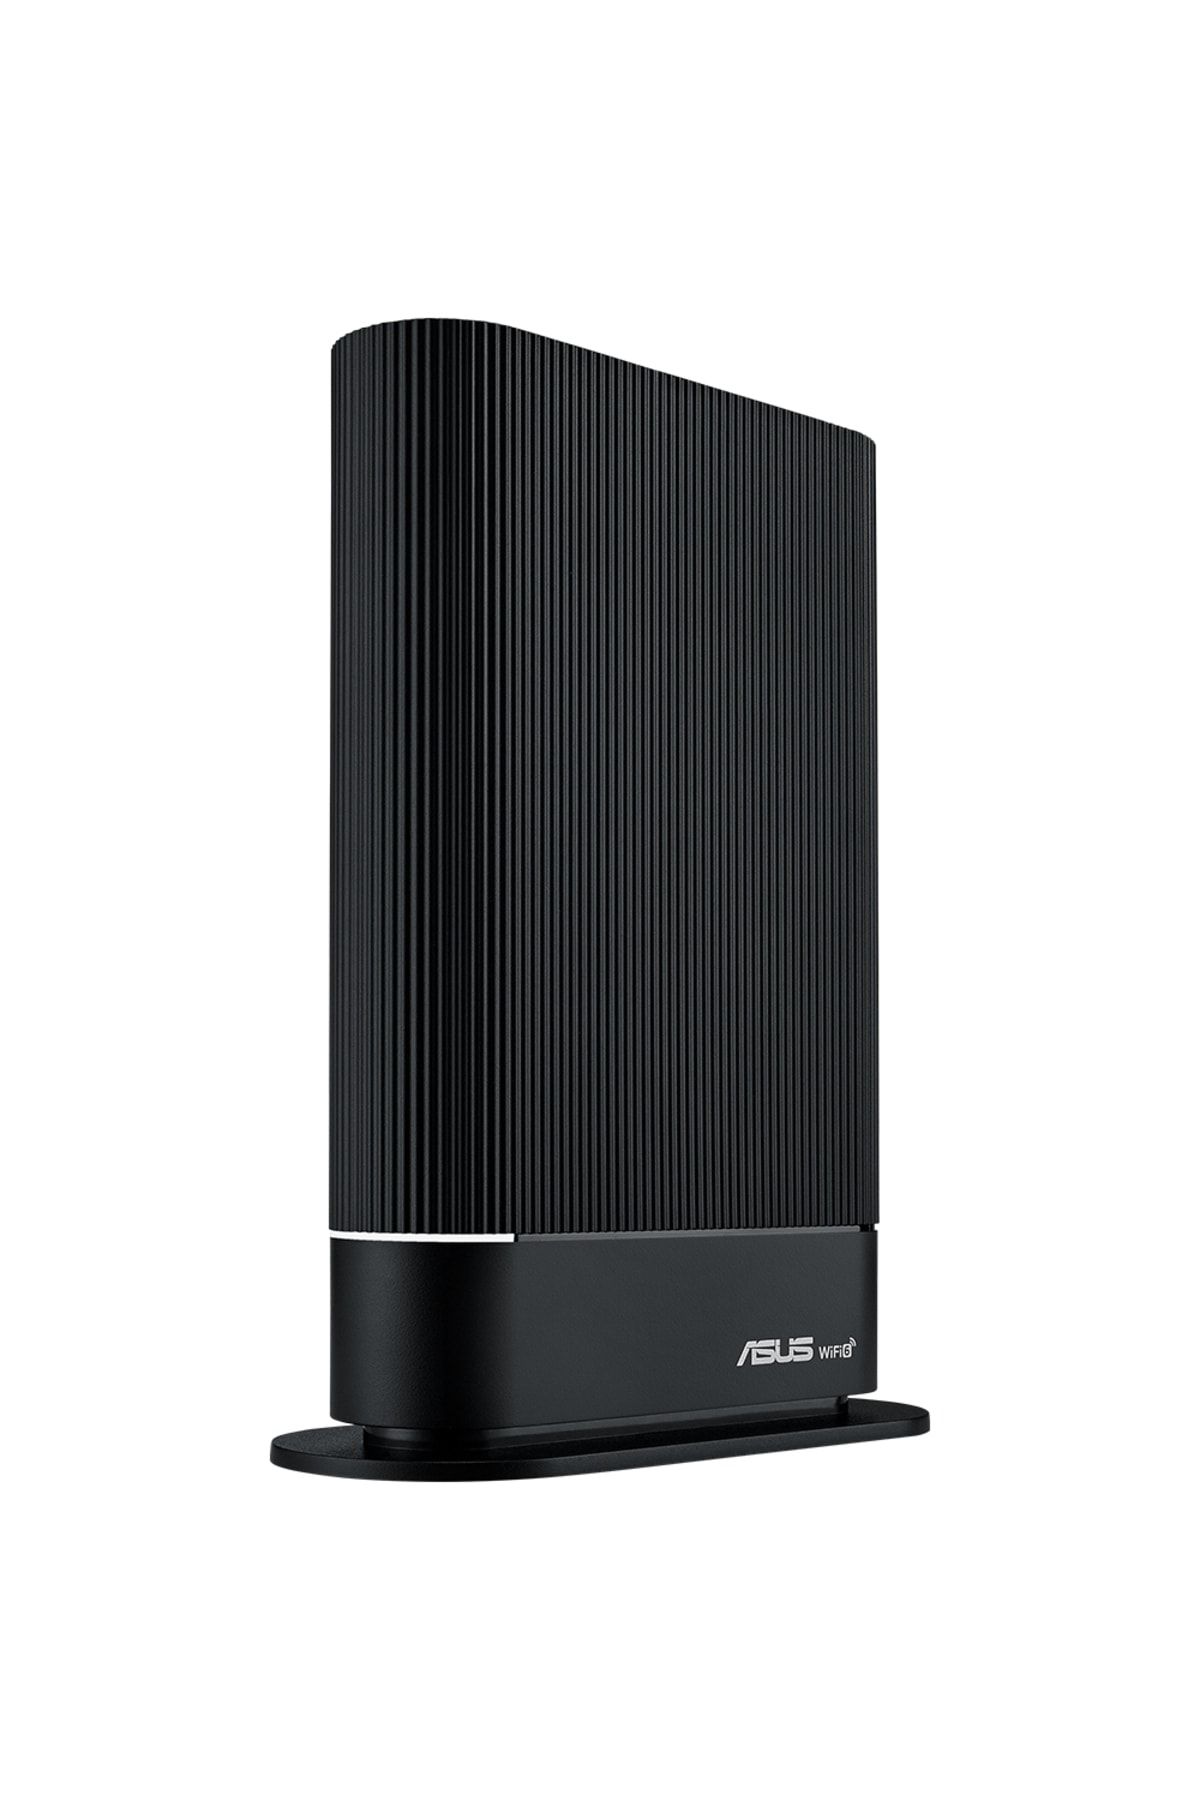 ASUS RT-AX59U AX4200 4200Mbps Dual Band WiFi 6 Router